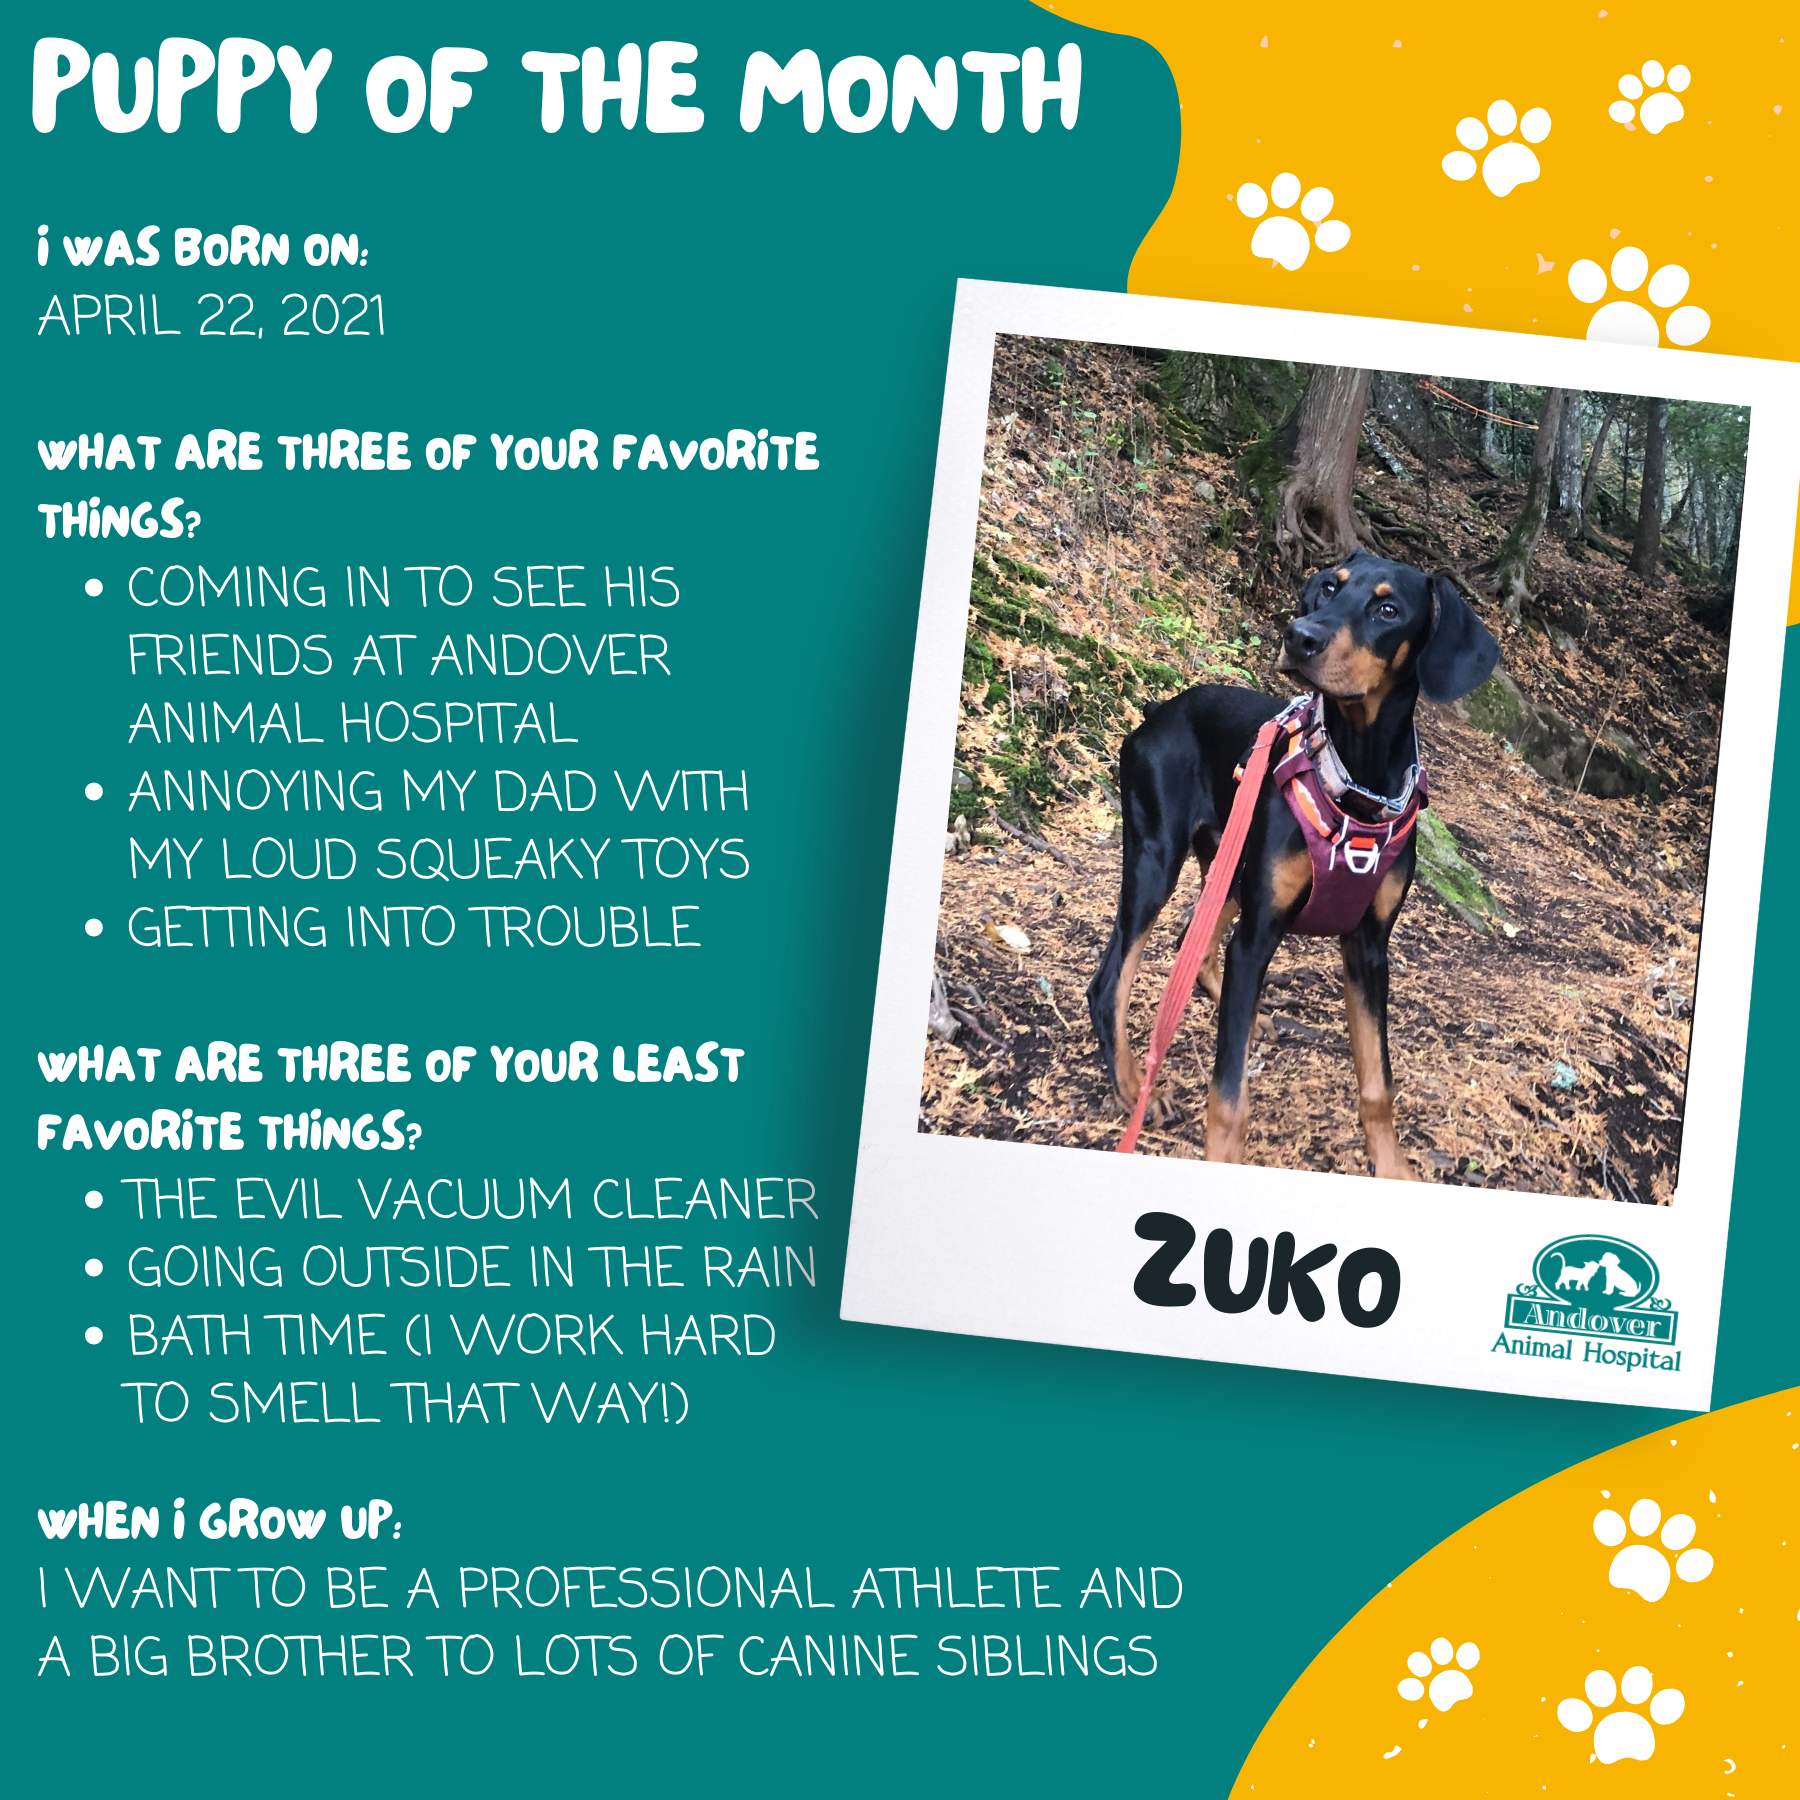 Puppy of the month Jan 2022